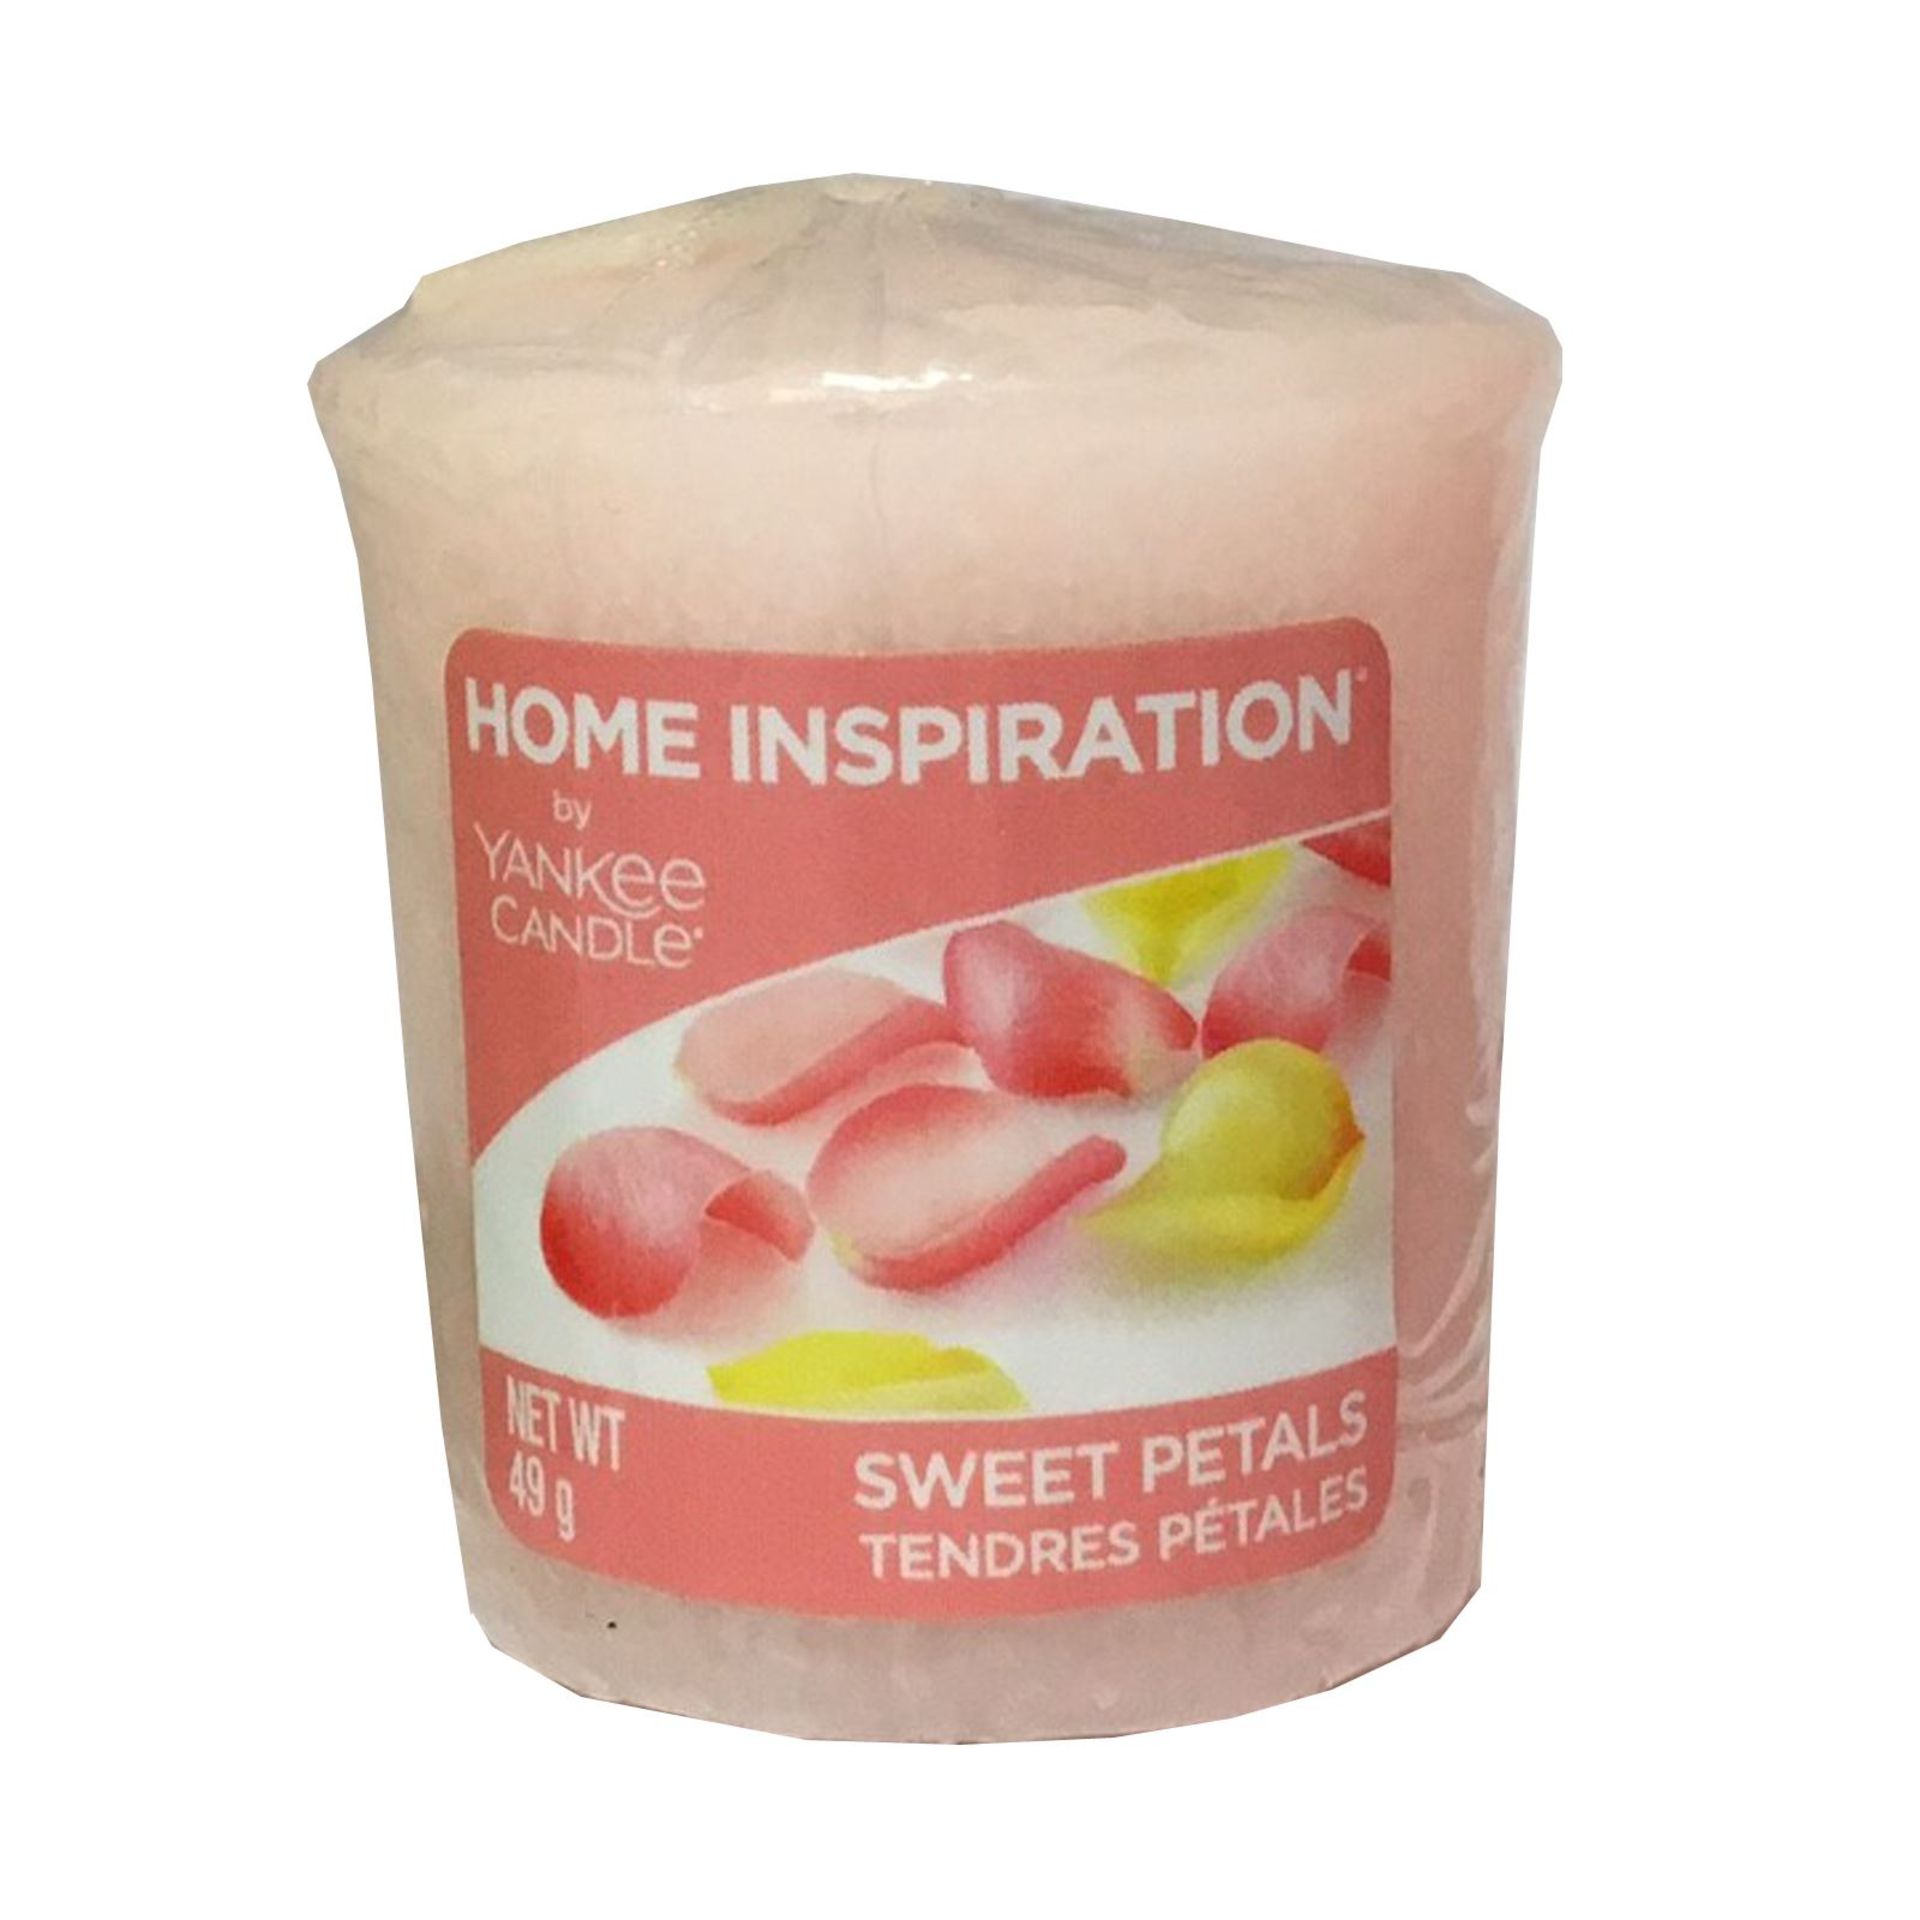 V *TRADE QTY* Brand New 18 X Yankee Candle Votive Sweet Petals - eBay Price £107.82 X 3 YOUR BID - Image 2 of 2